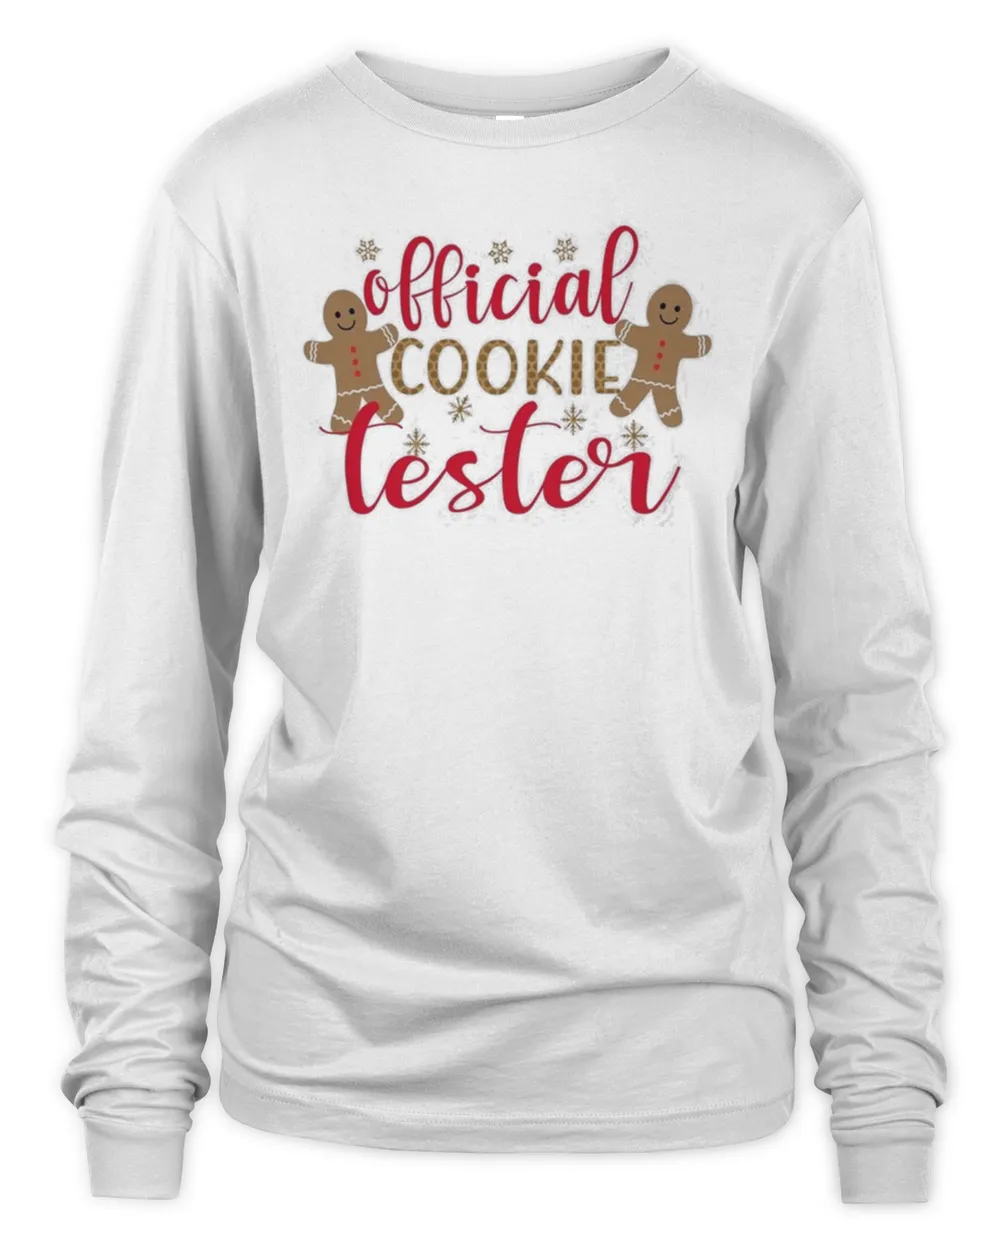 Official Cookie Tester Christmas Shirt